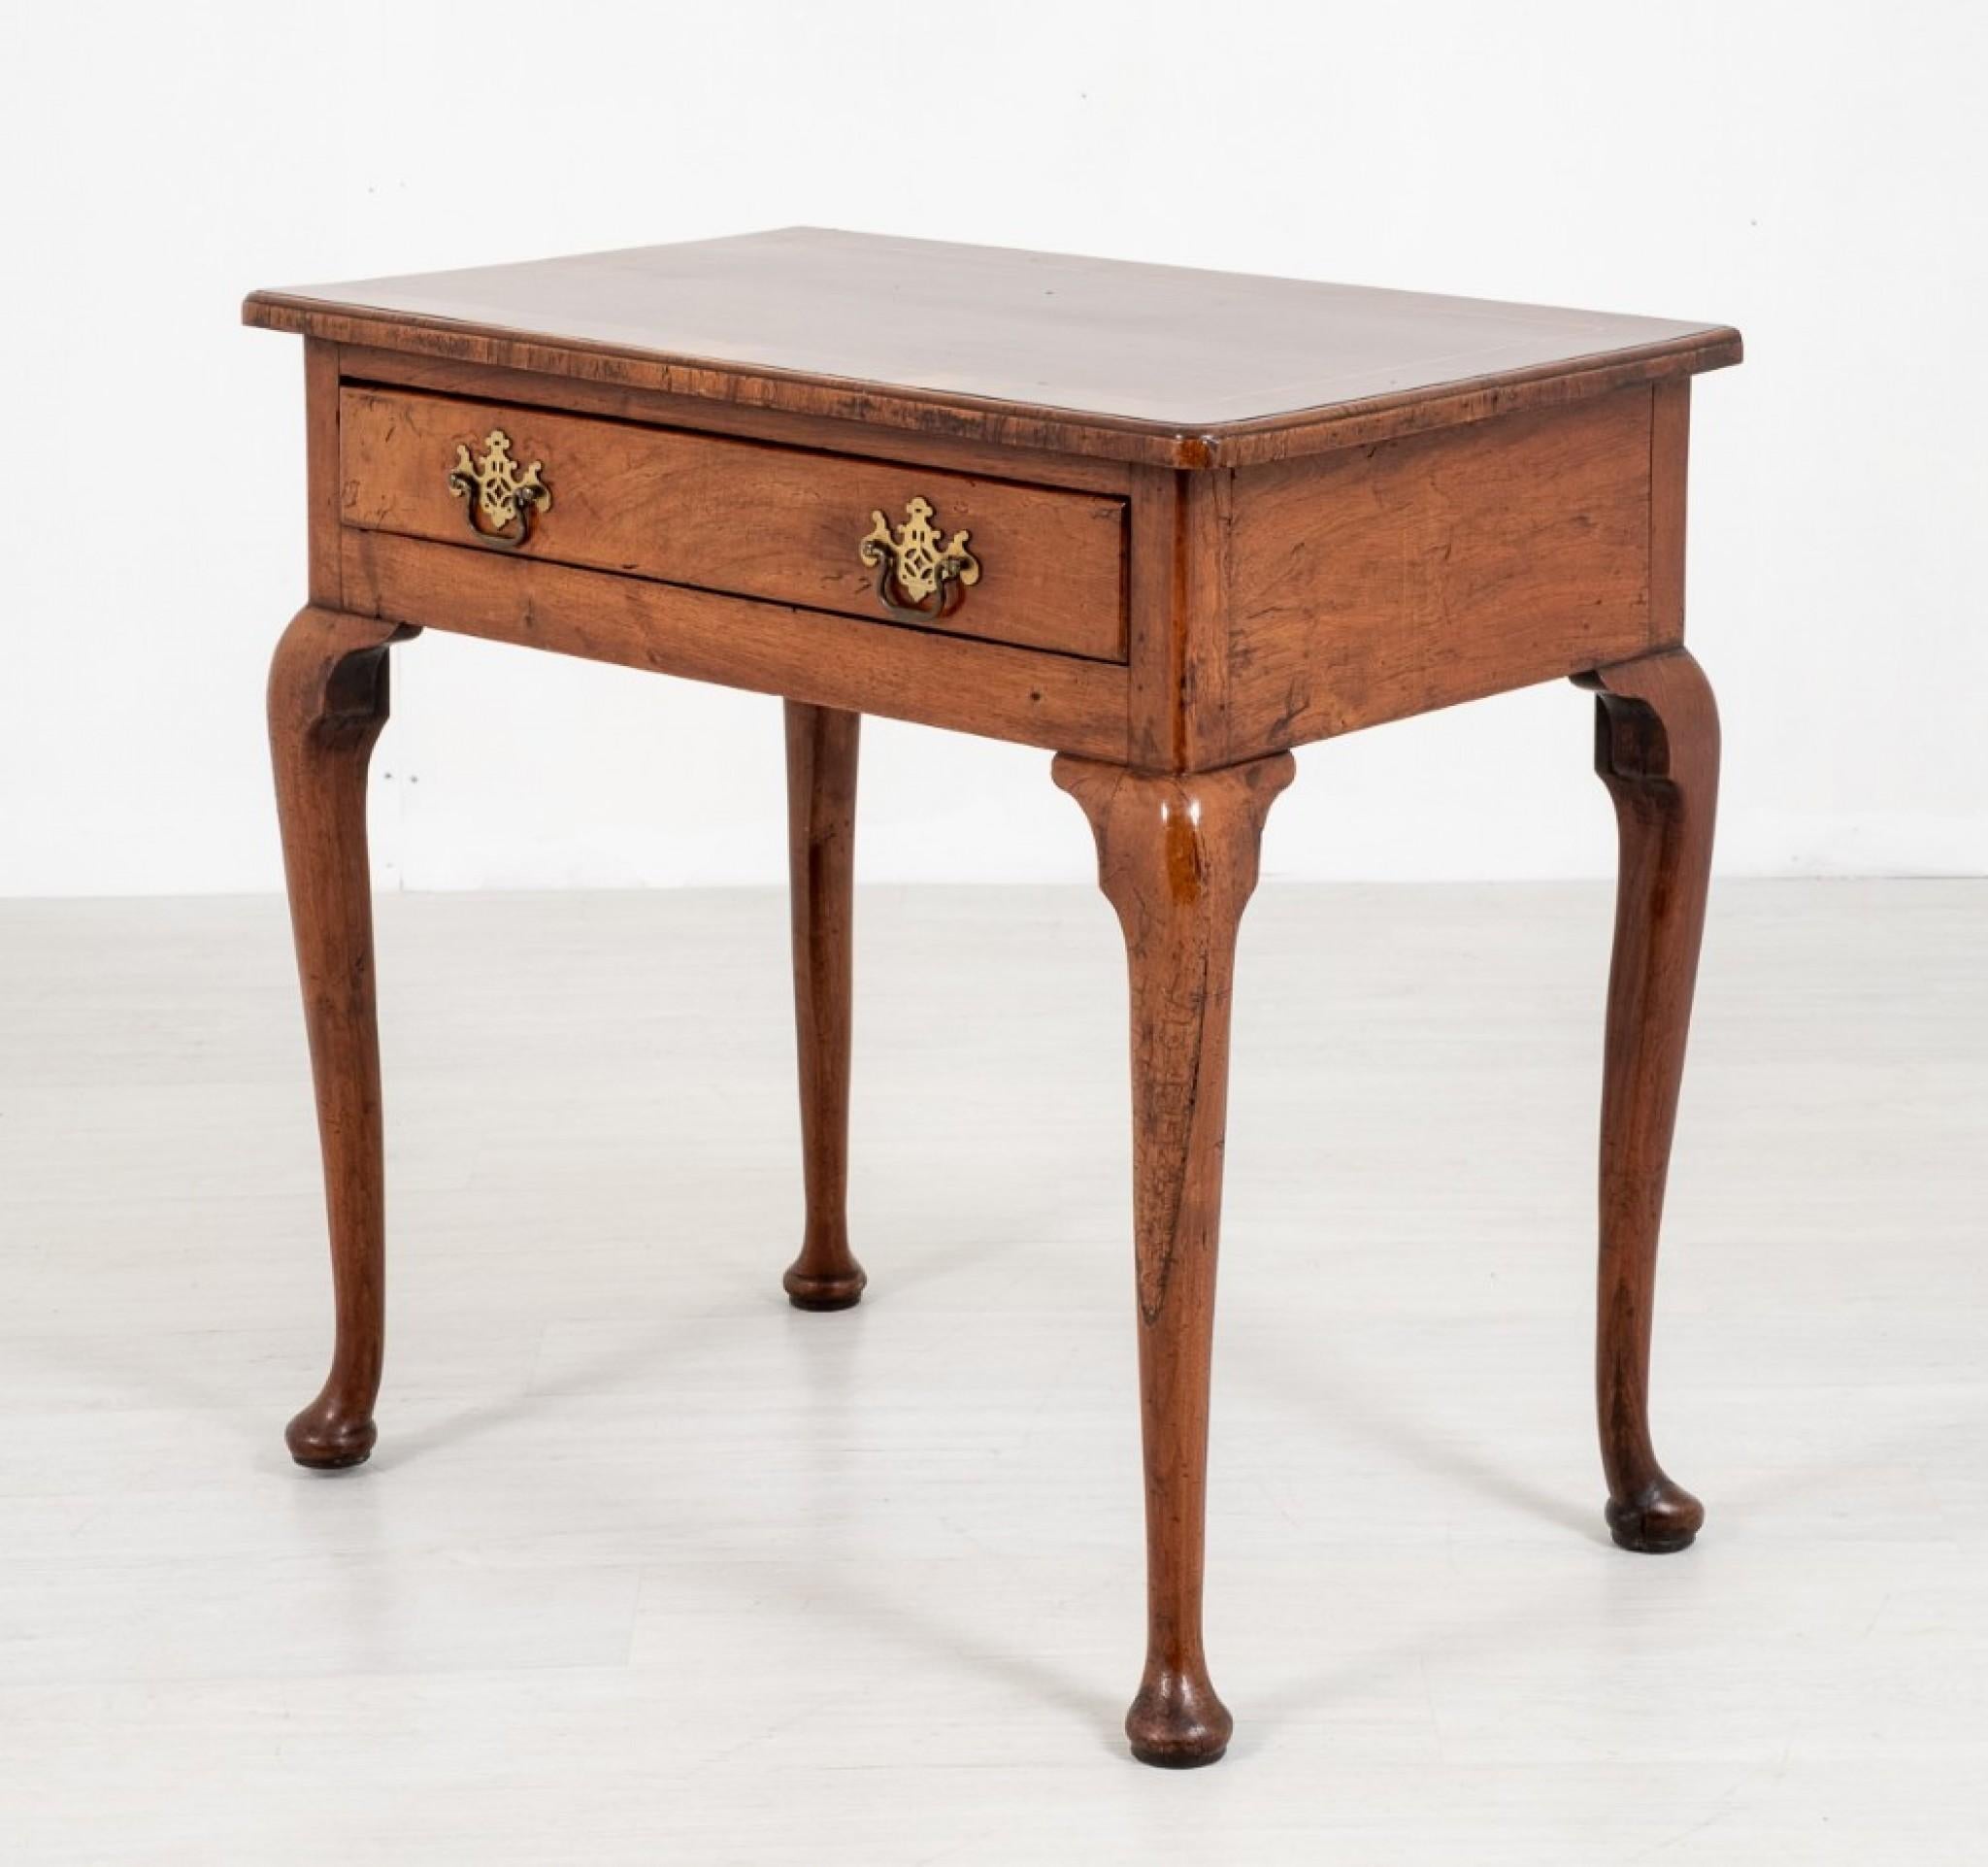 Queen Anne Style Mahogany LowBoy.
Standing upon typical Cabriole Legs with Pad Feet.
18th Century
Having a Single Drawer with Pierced Plate Handles.
The top of the LowBoy having Crossbandings, Holly line inlays and Crossgrain Mouldings.